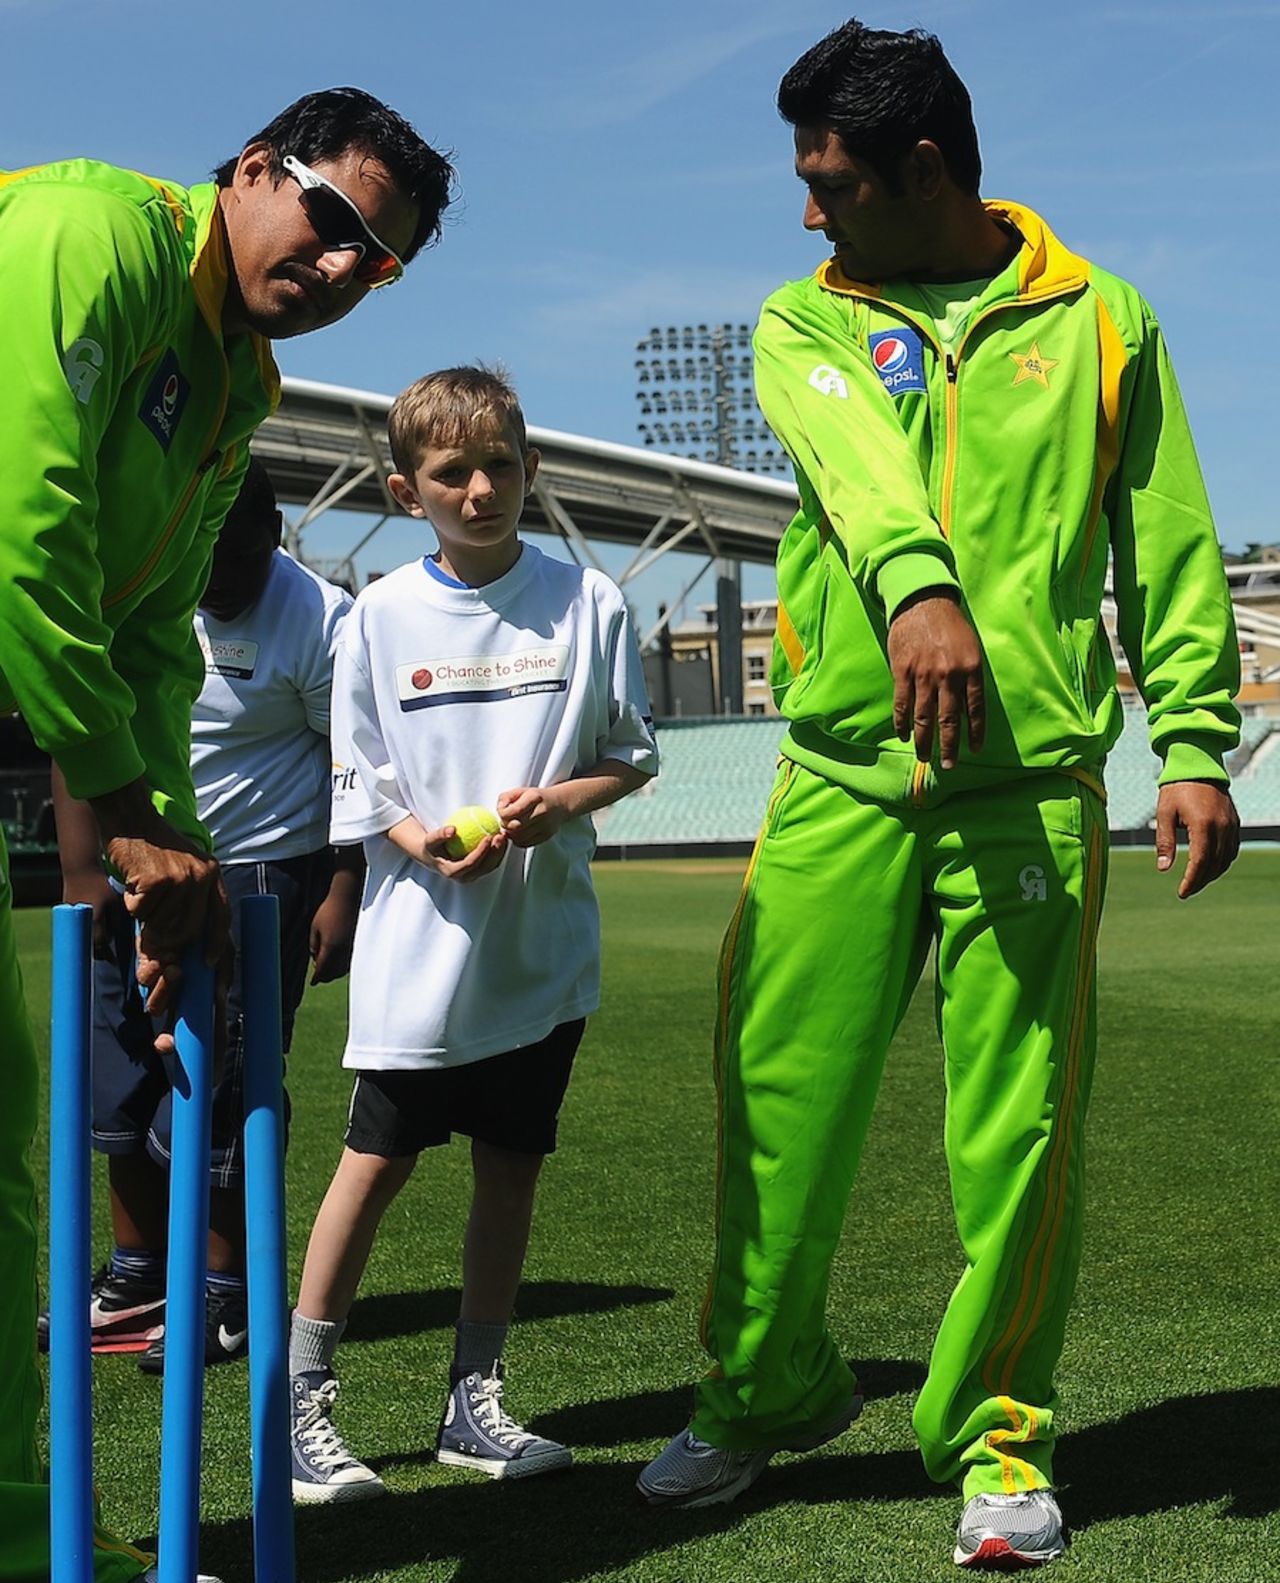 Asad Shafiq shares bowling tips with a kid, The Oval, London, June 4, 2013